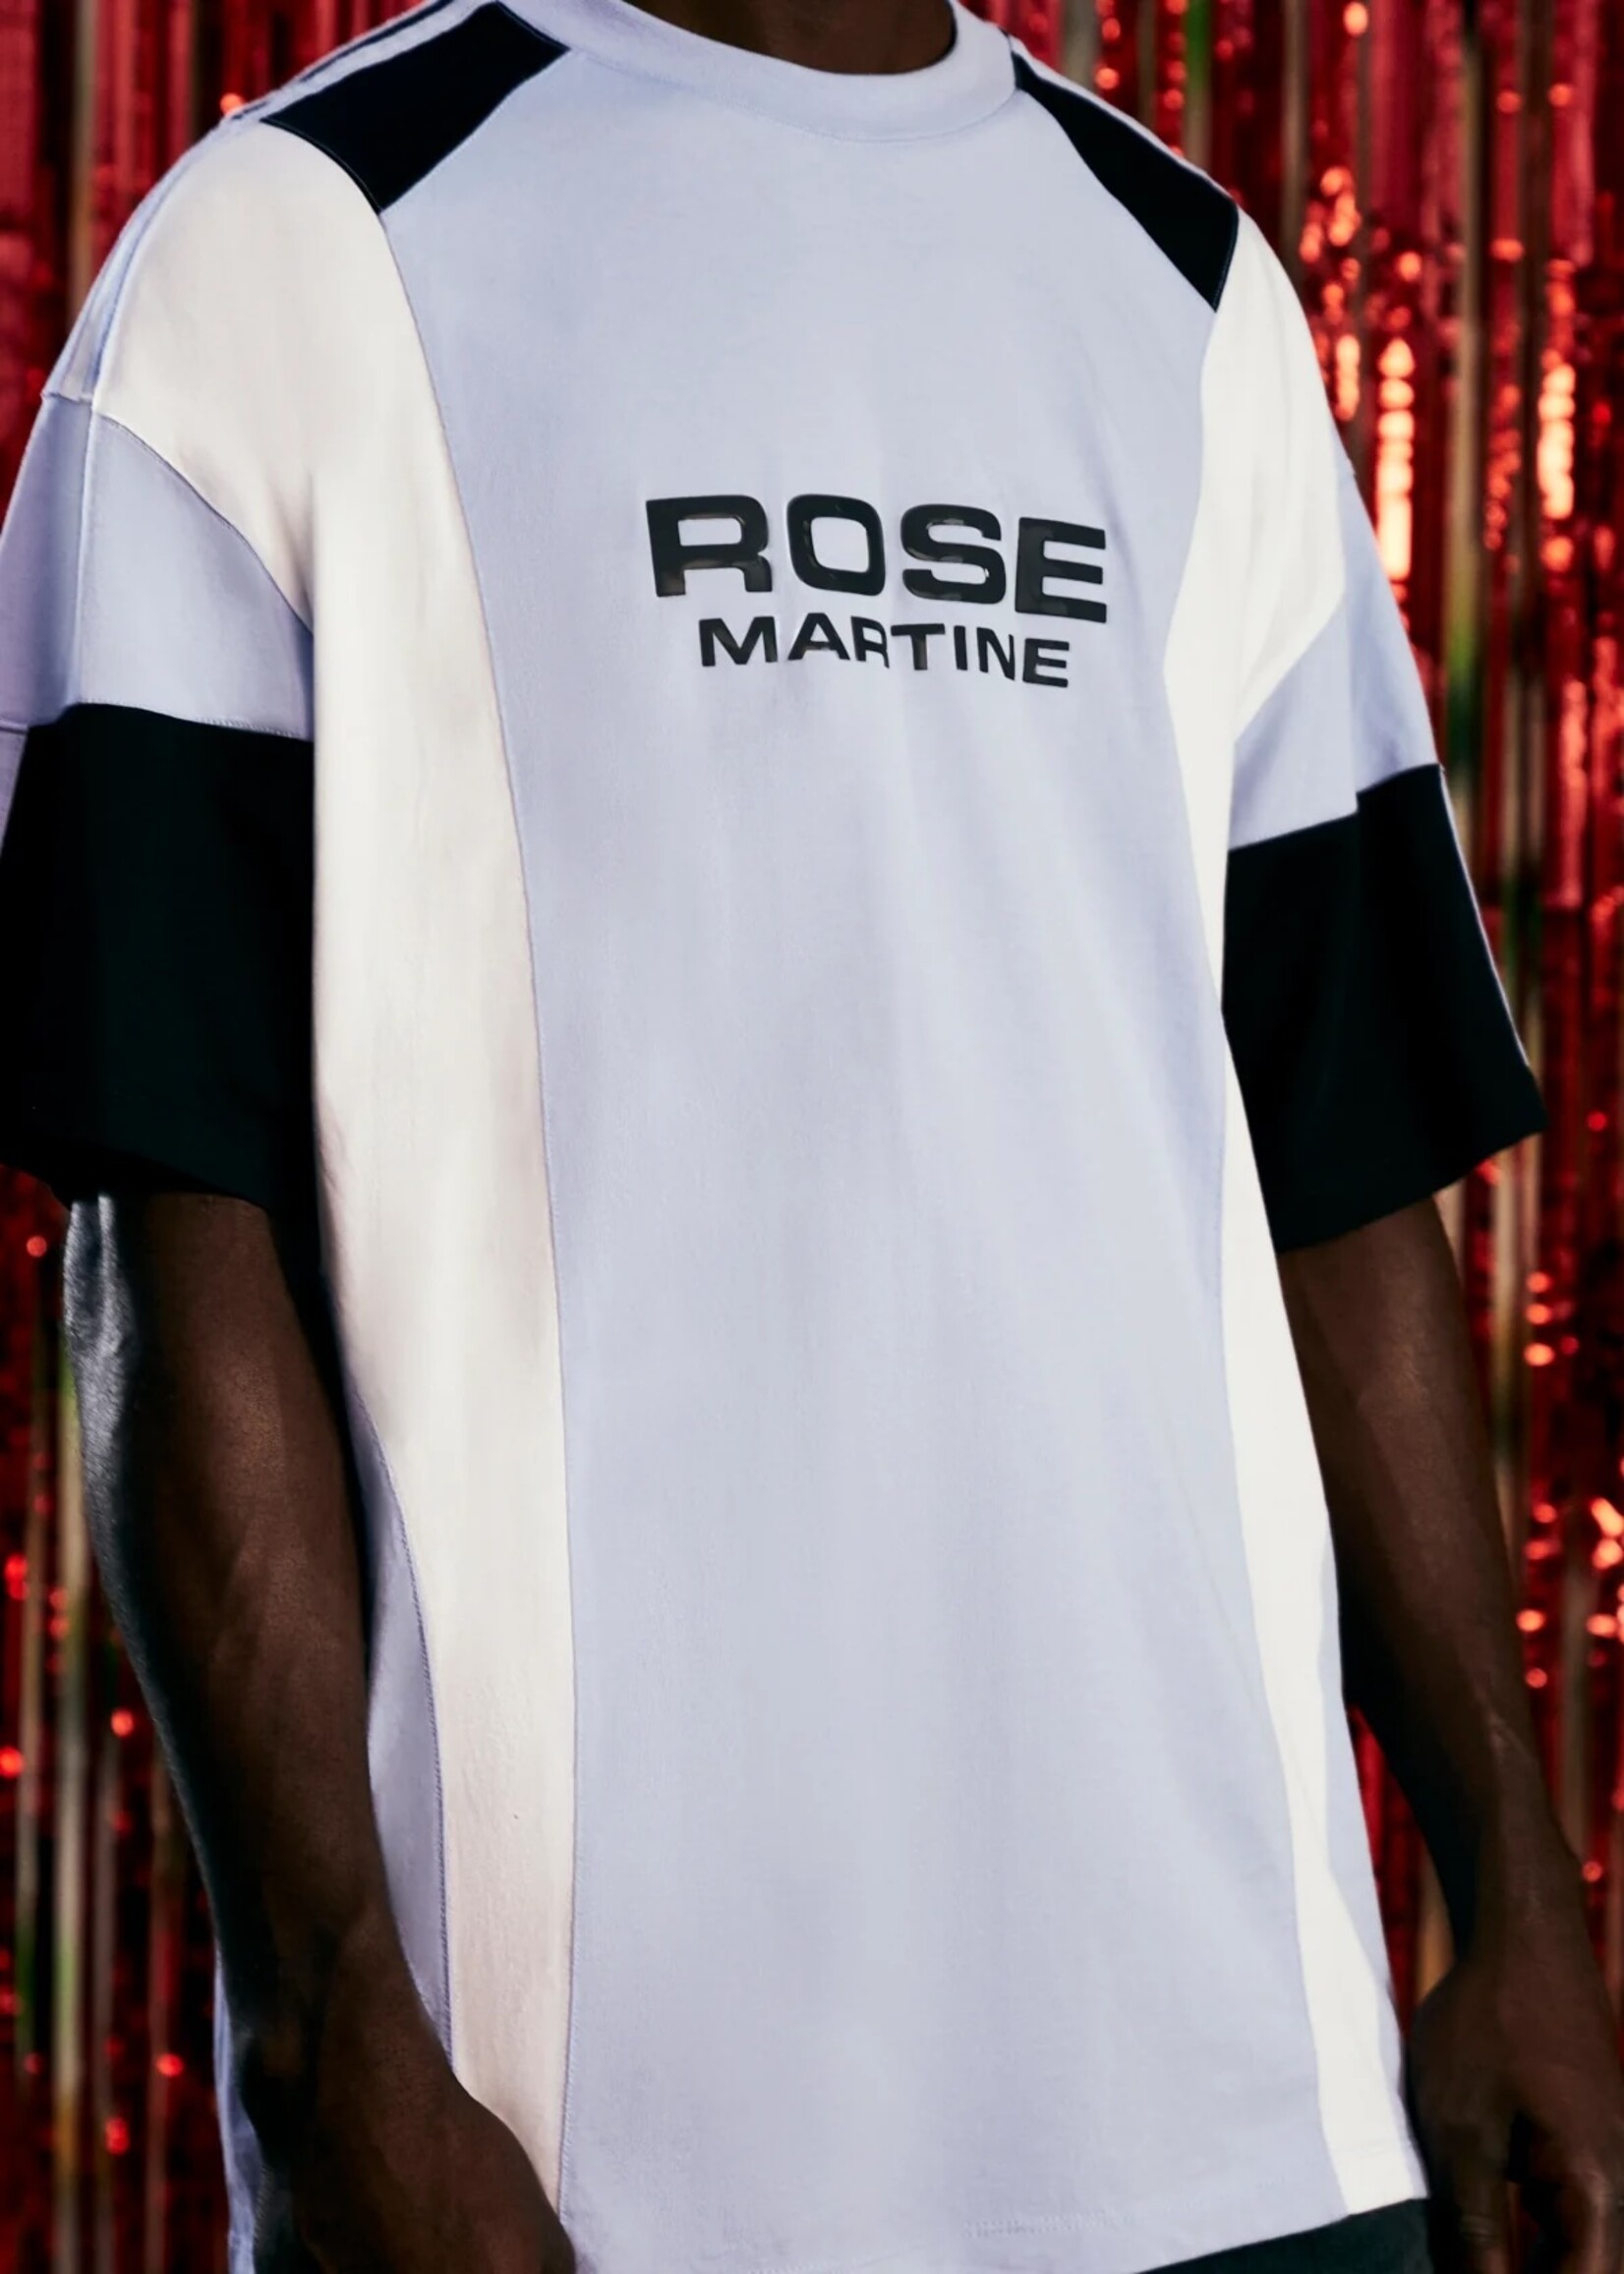 MARTINE ROSE Oversized Panel T-shirt in Blue, Black and White